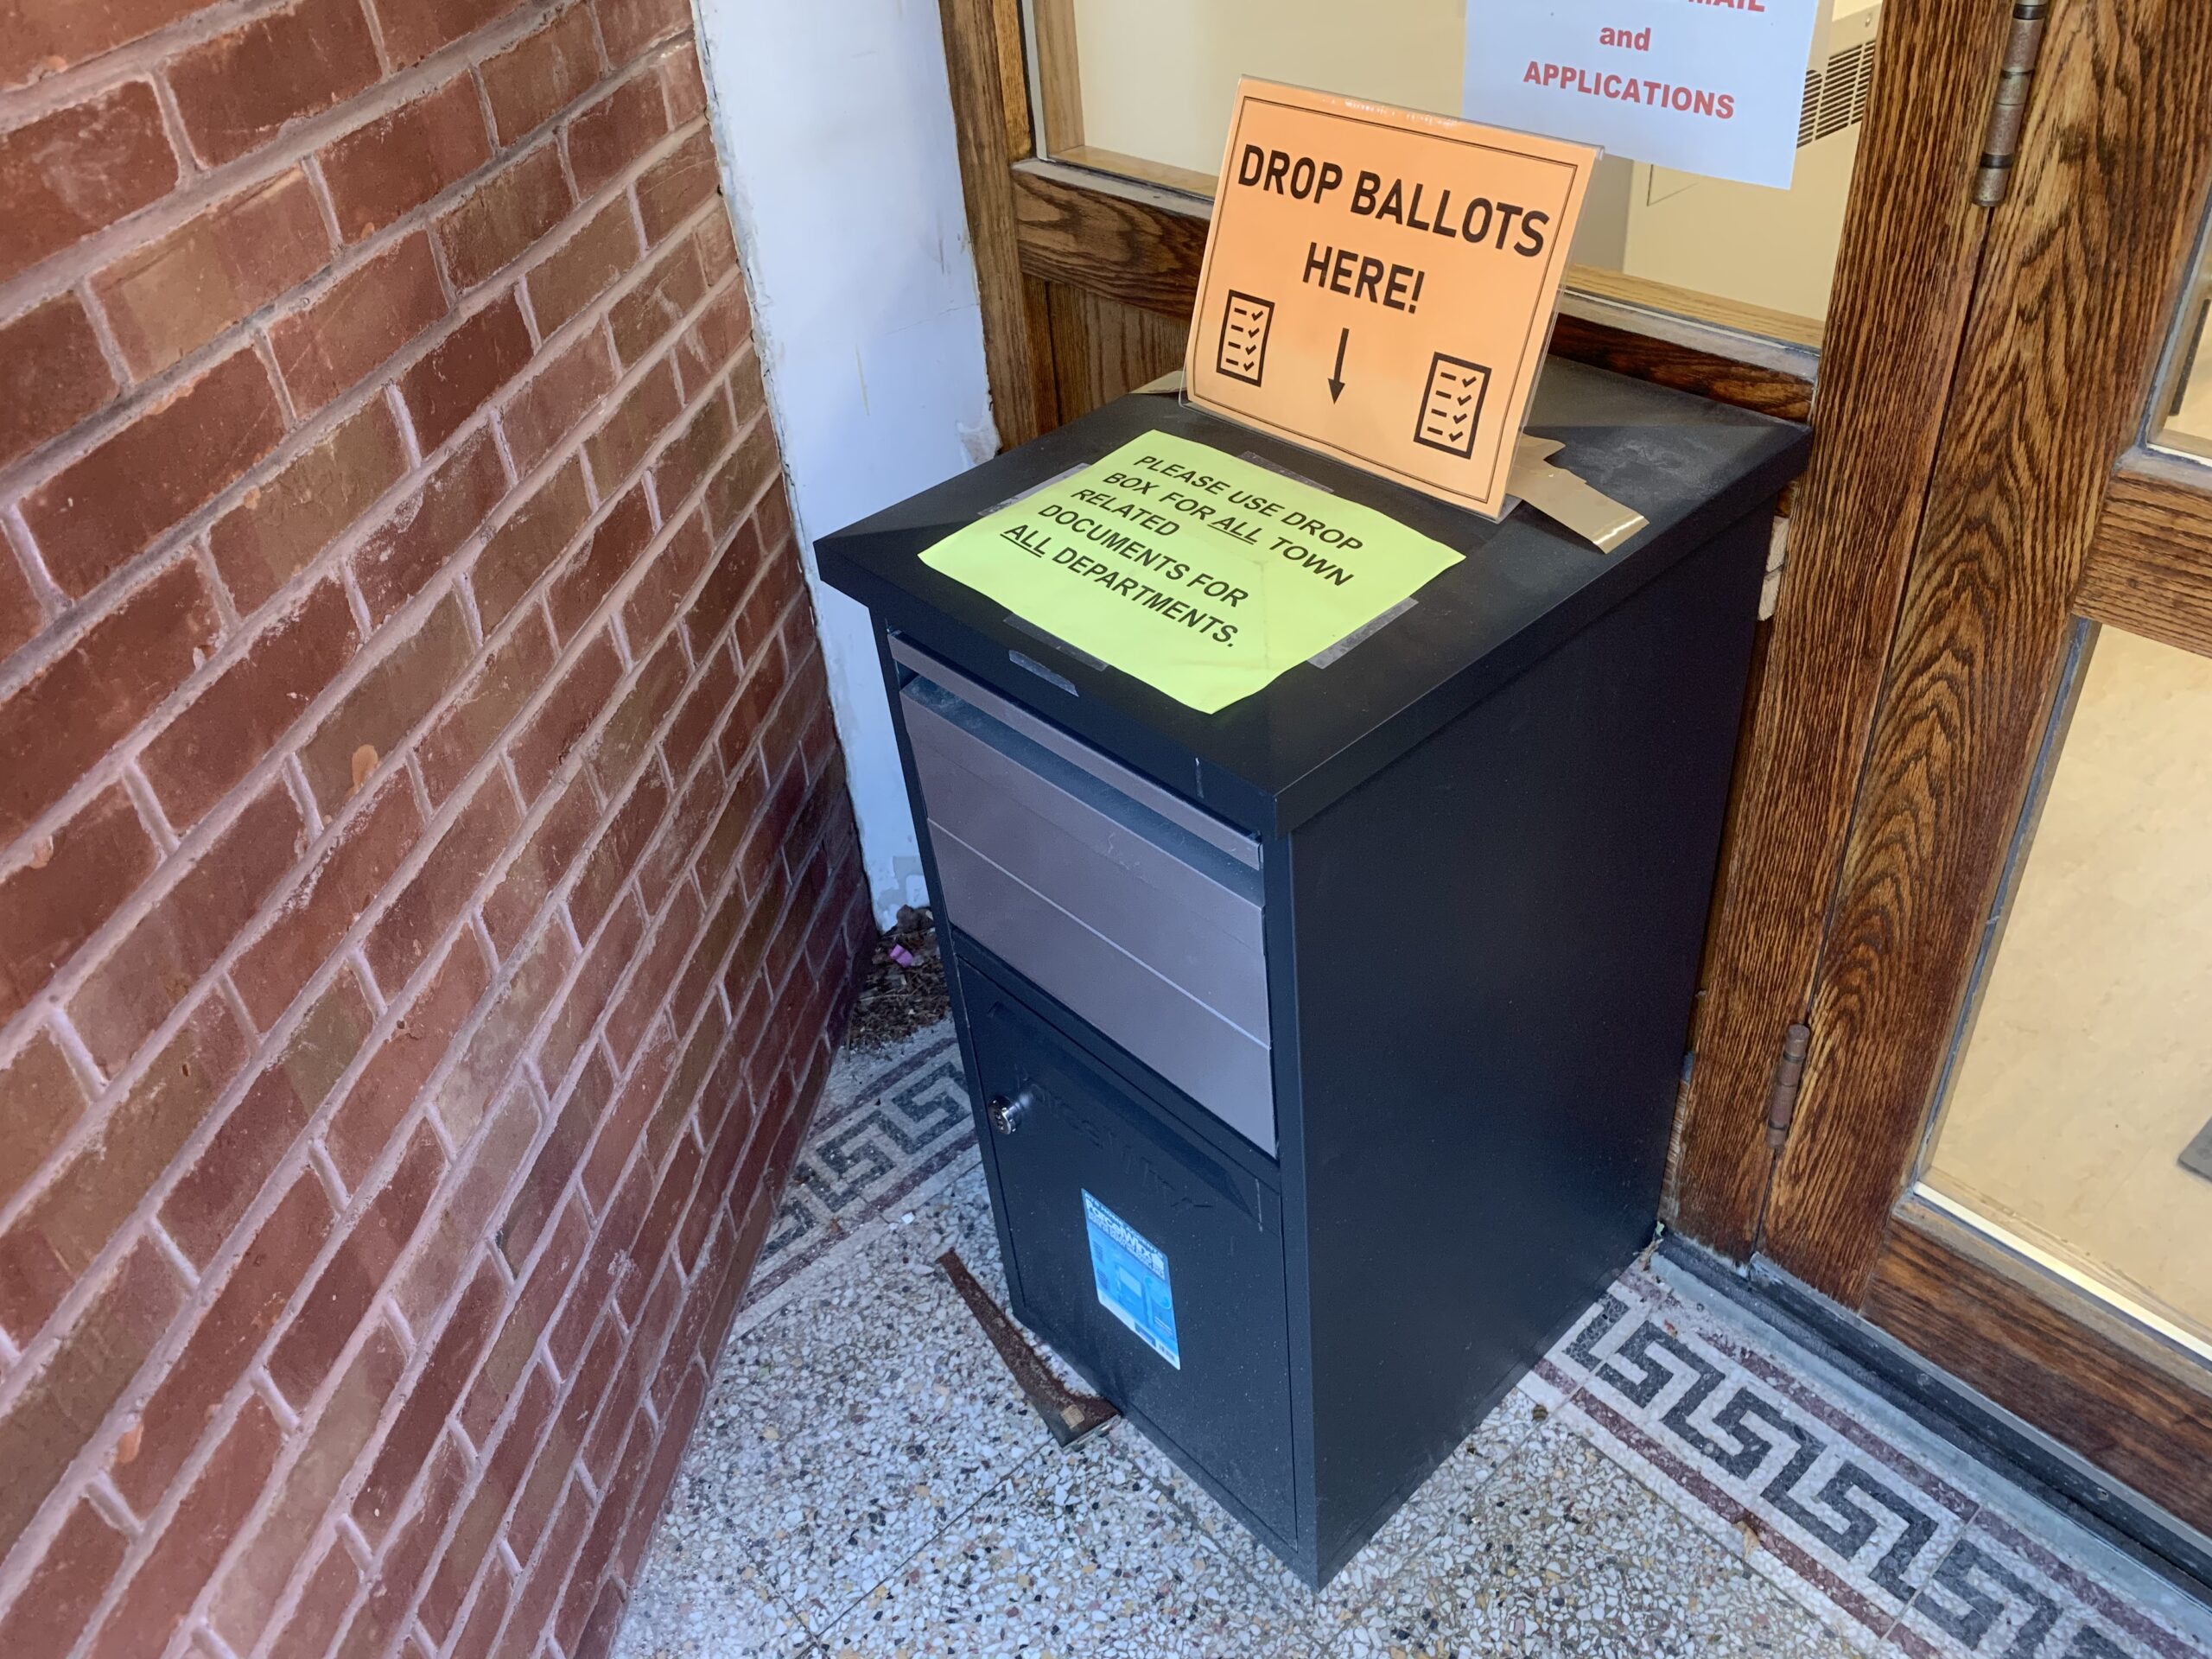 Town clerk clarifies mail-in ballot deadline after some voters receive wrong information